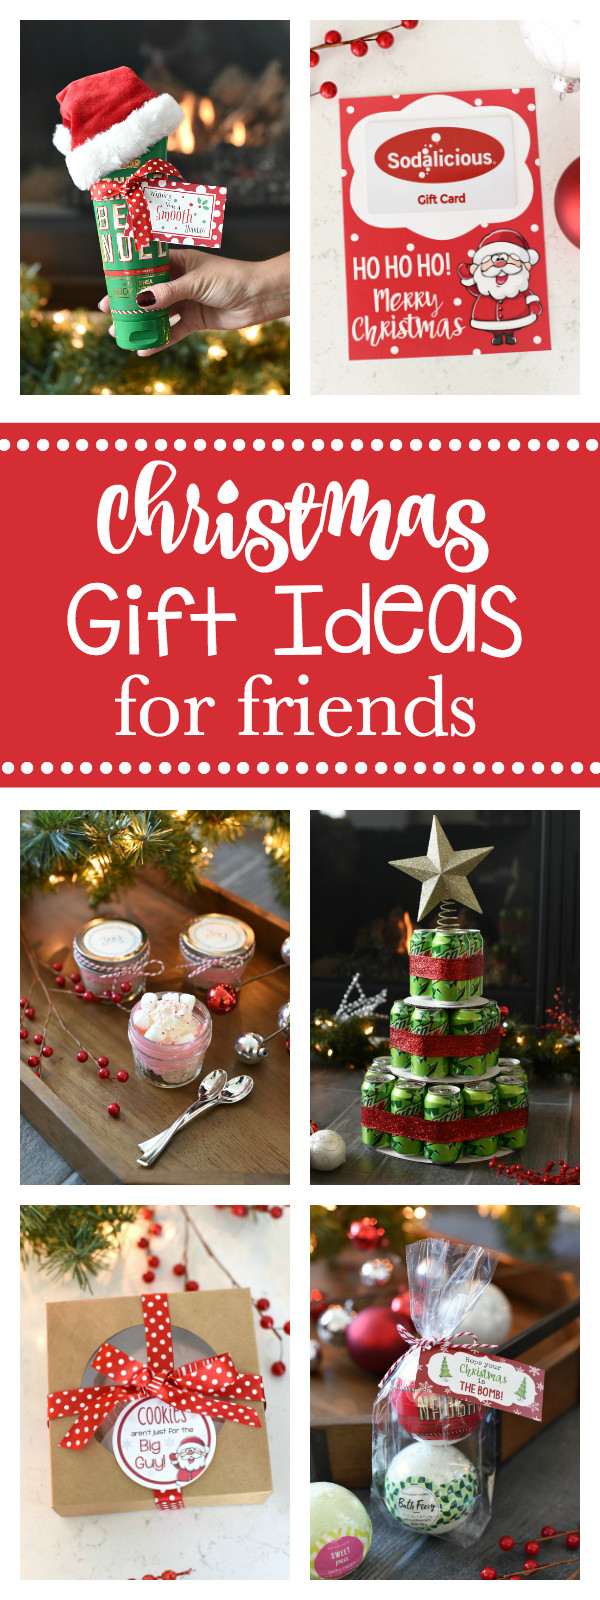 Great Gift Ideas For Girlfriend
 Good Gifts for Friends at Christmas – Fun Squared